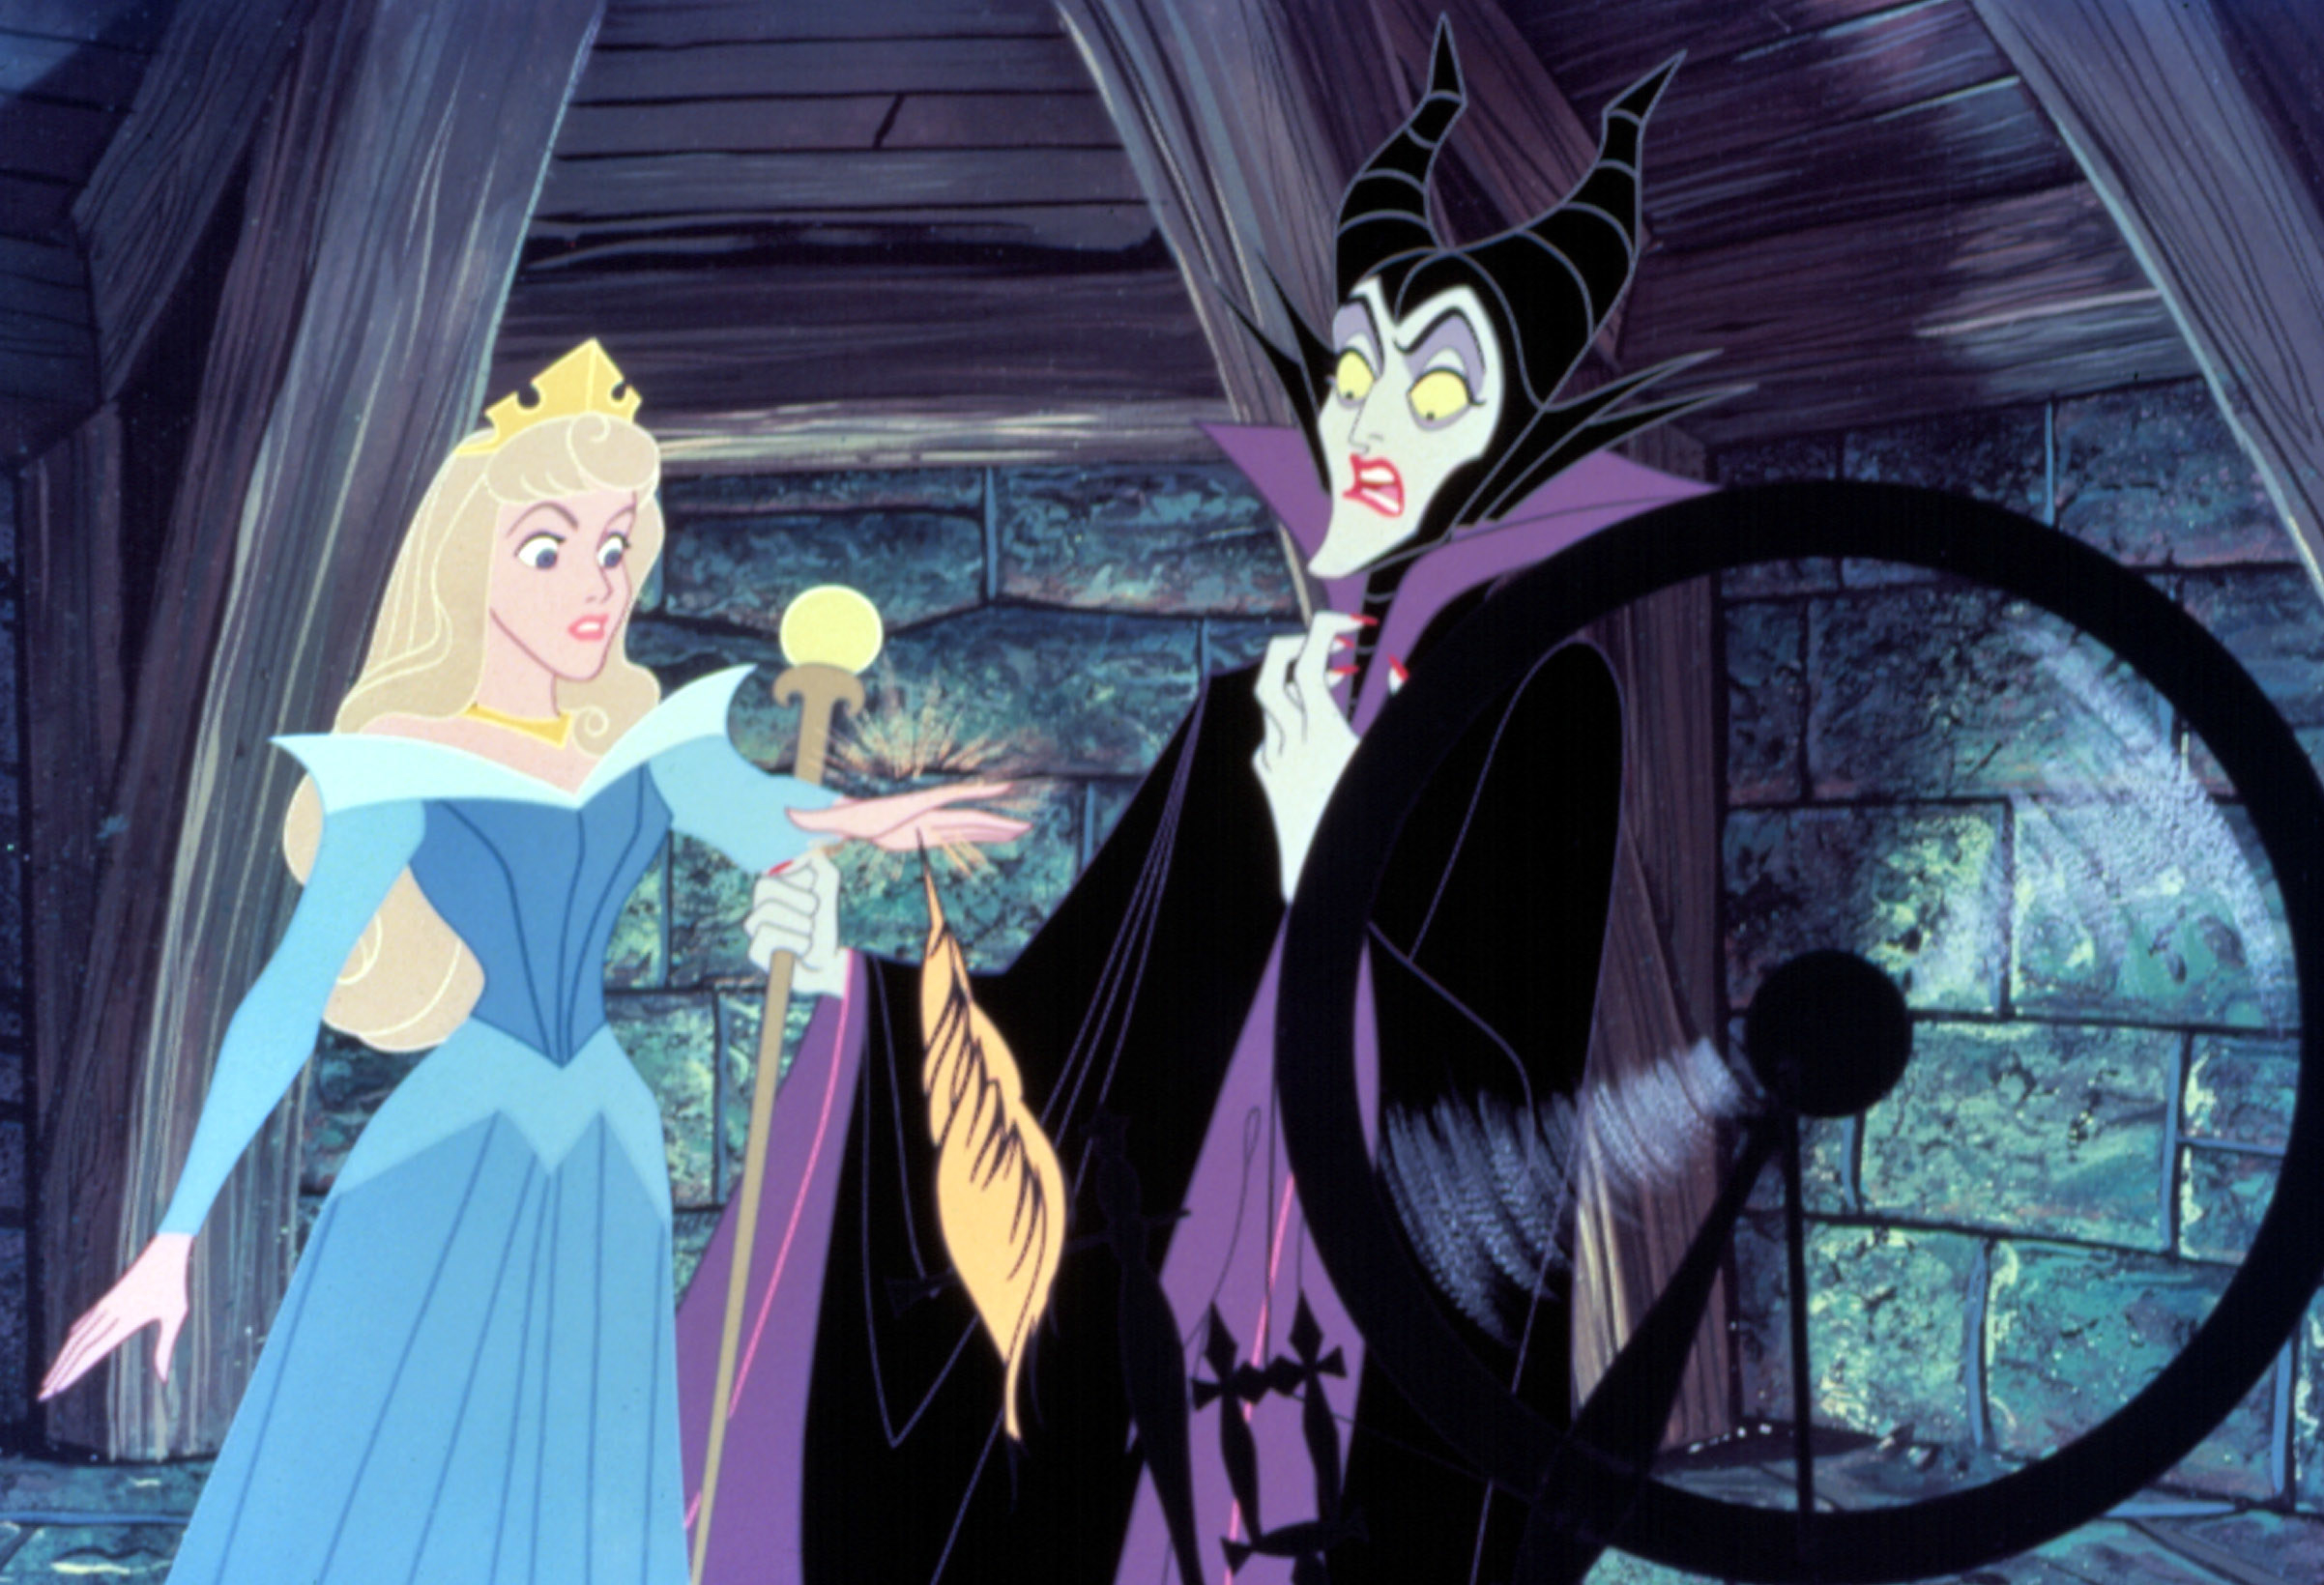 Sleeping Beauty and Maleficent in the animated version of the movie